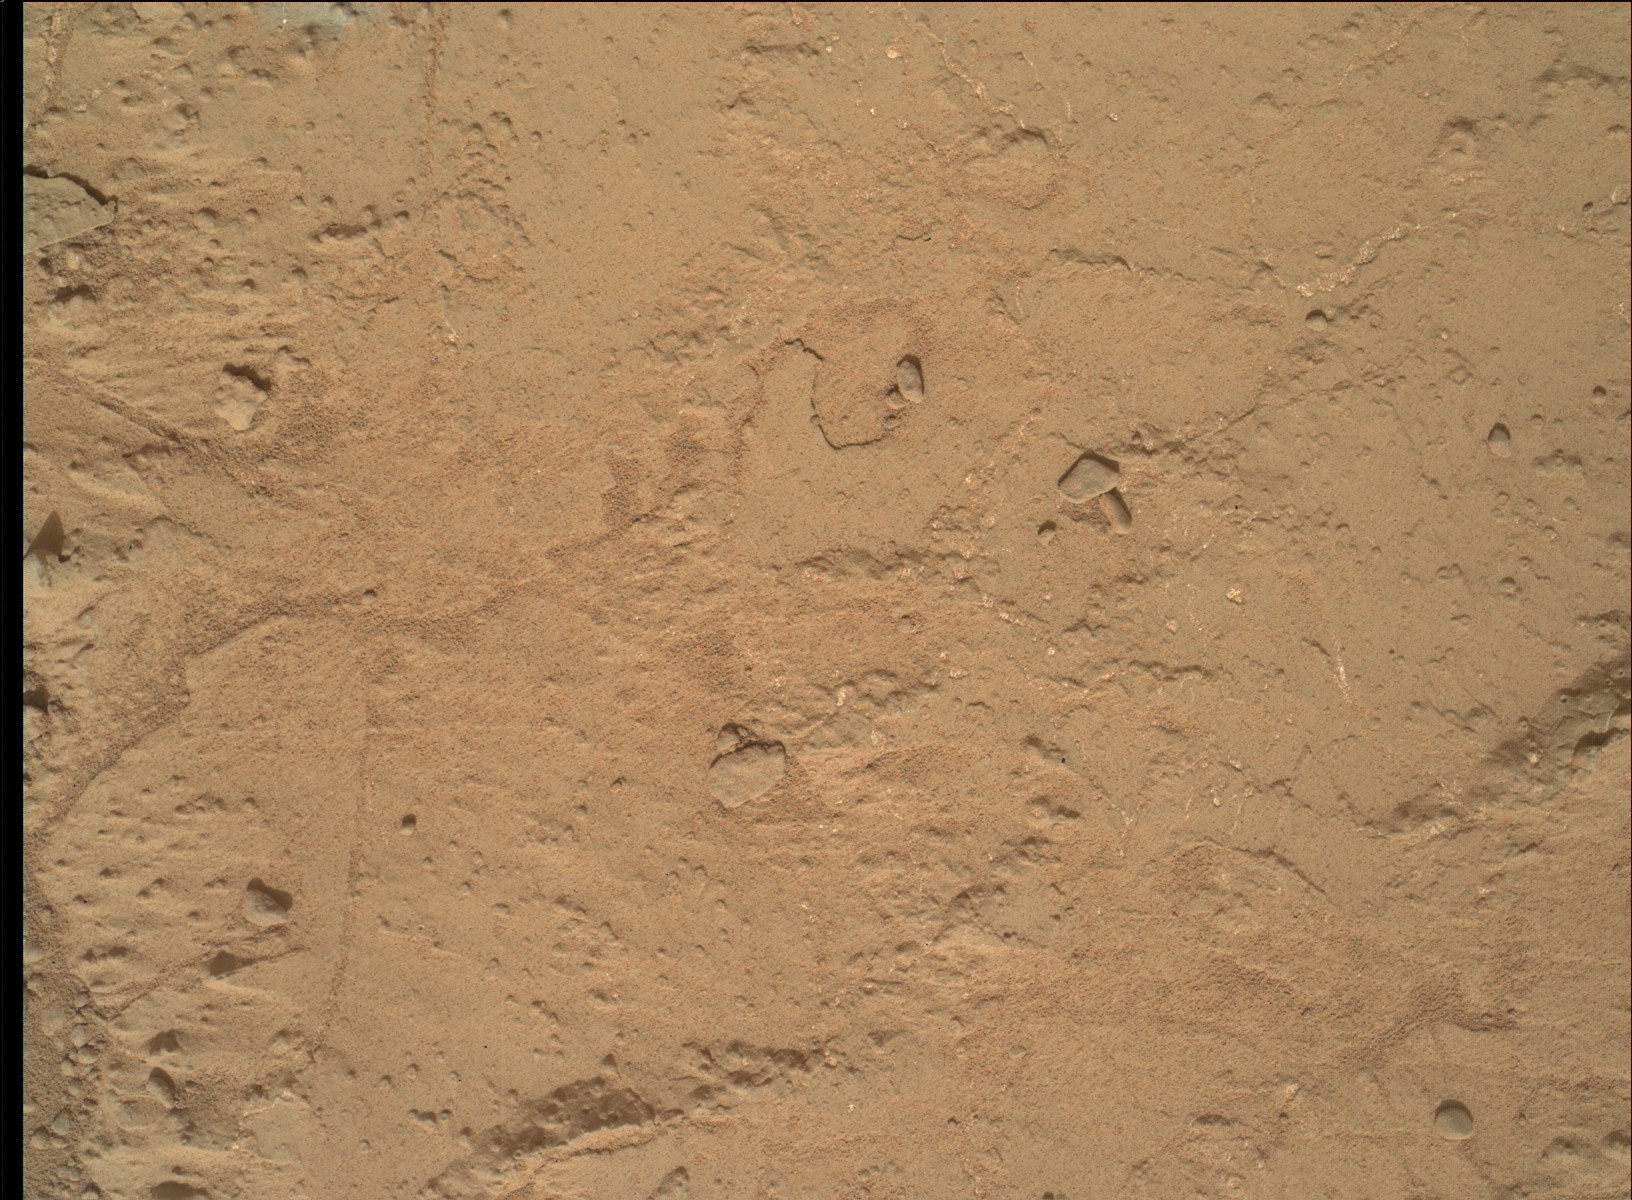 Nasa's Mars rover Curiosity acquired this image using its Mars Hand Lens Imager (MAHLI) on Sol 171